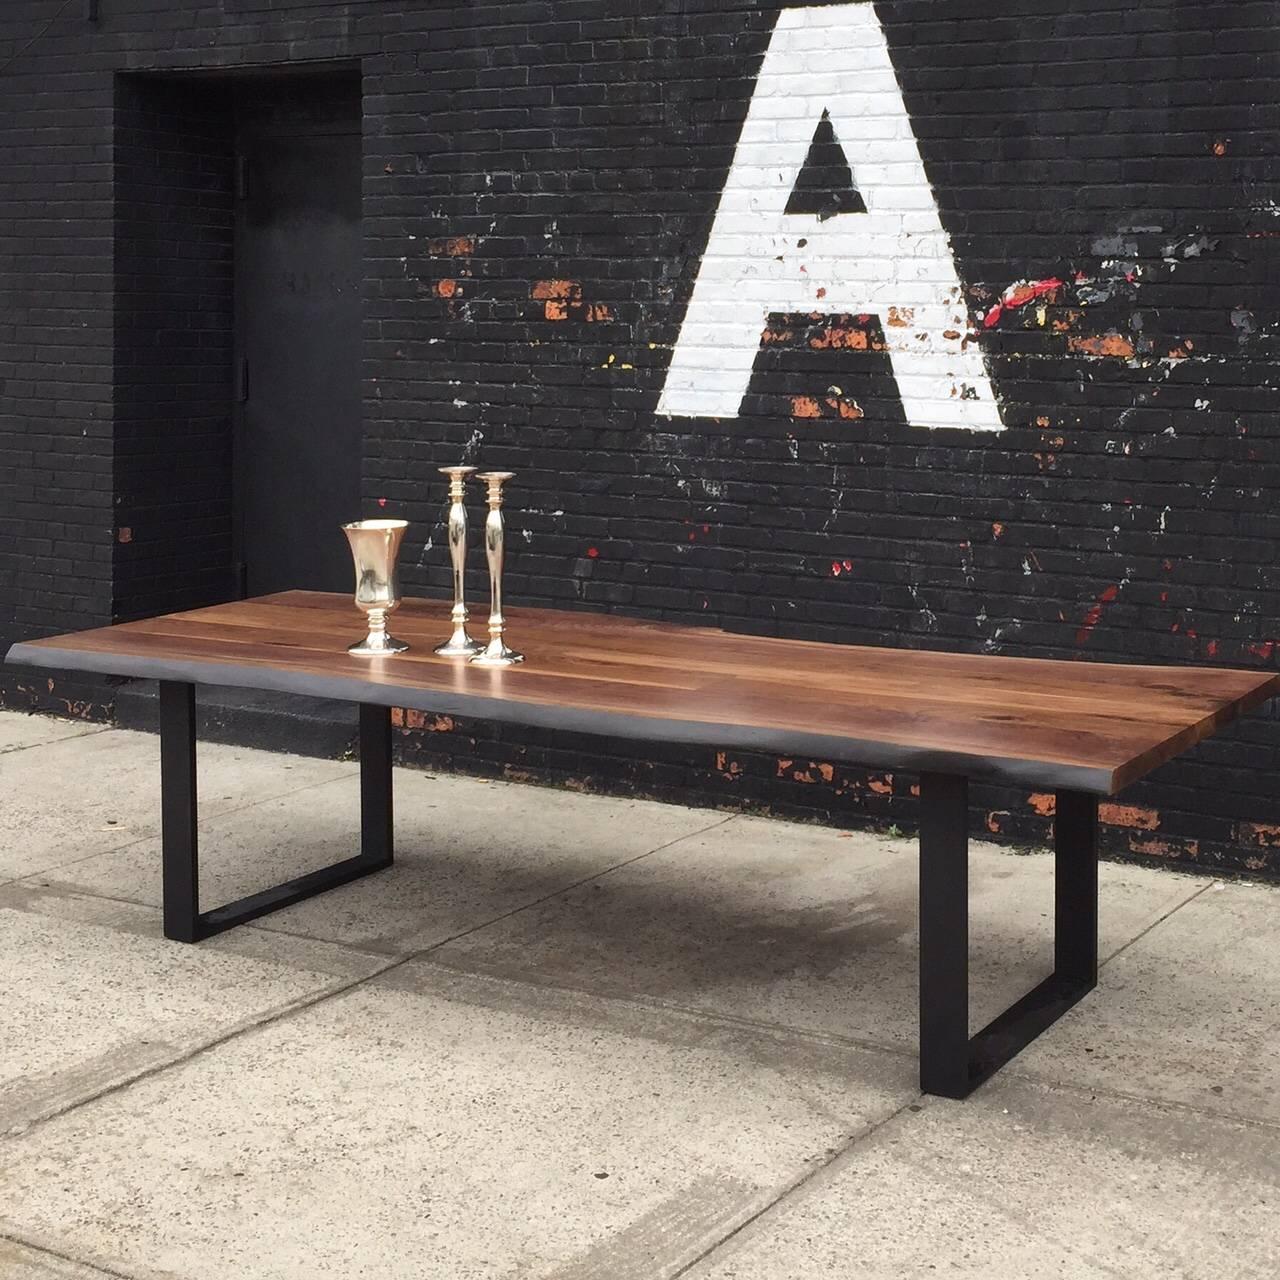 Solid American black walnut live edge tabletop paired with our solid blackened steel wishbone legs at 120